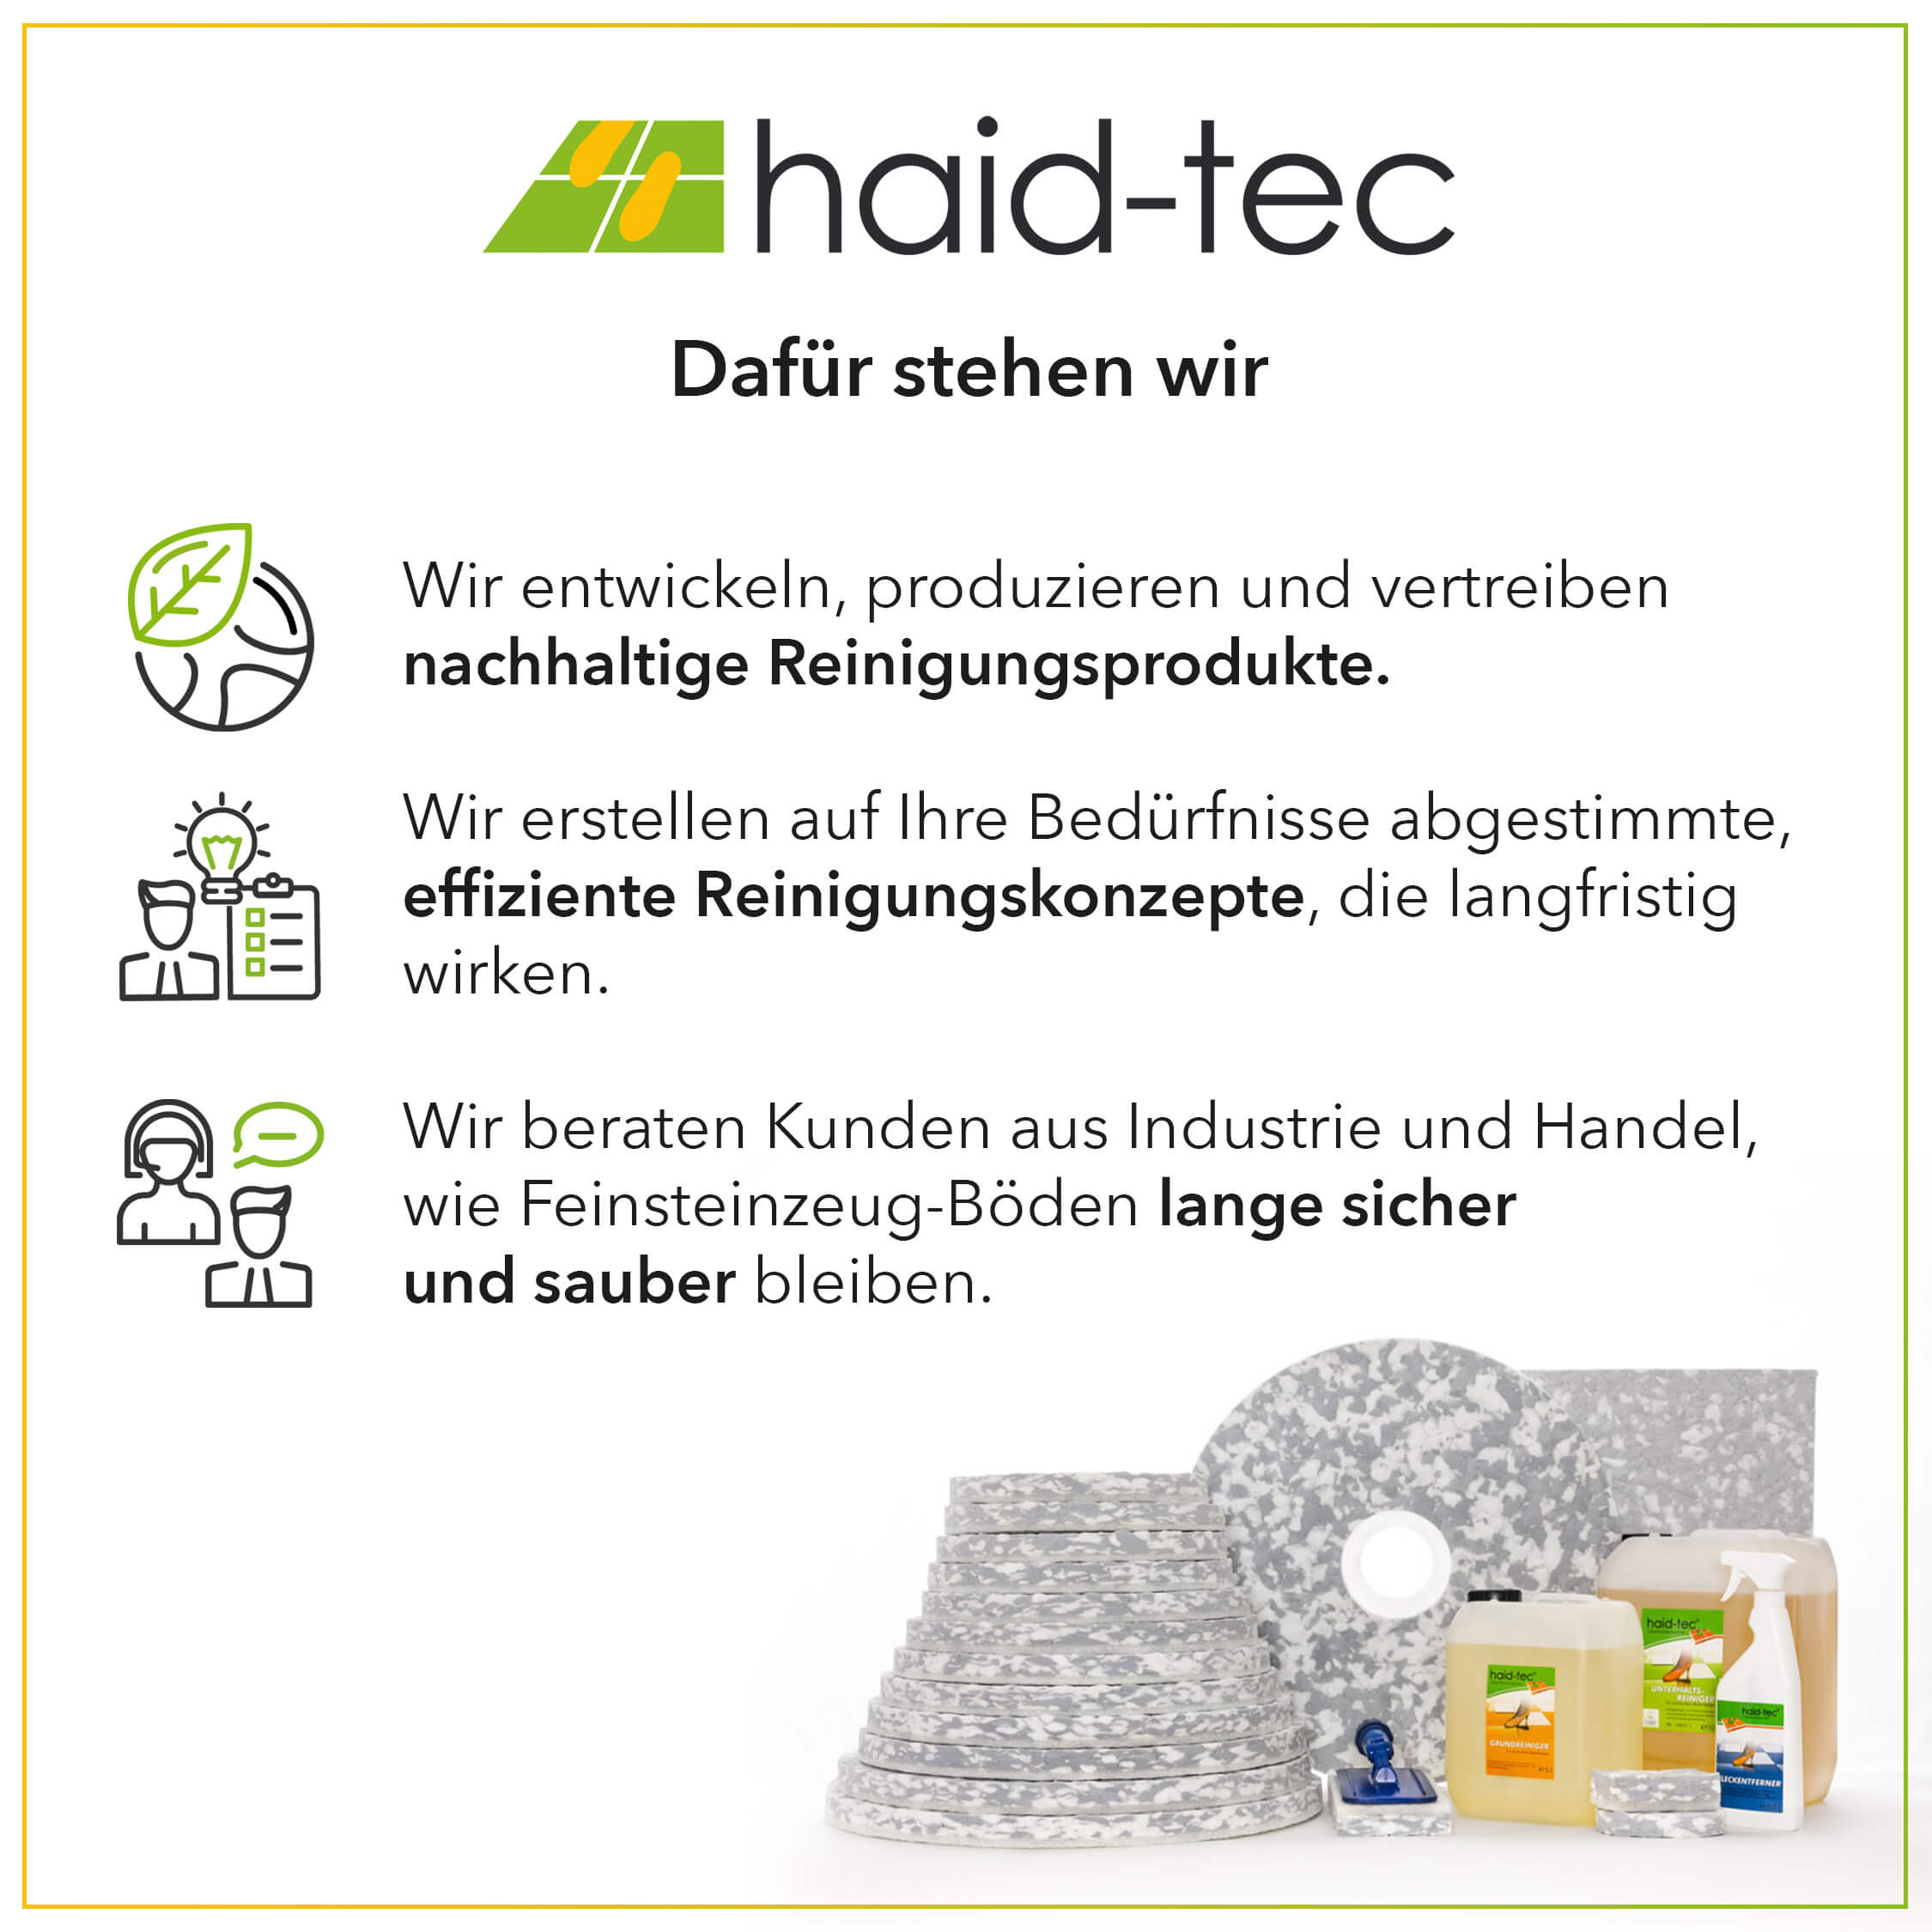 haid-tec Workshop cleaner 1 L, oil stain remover, industrial cleaner - concentrate - biodegradable - made in Germany